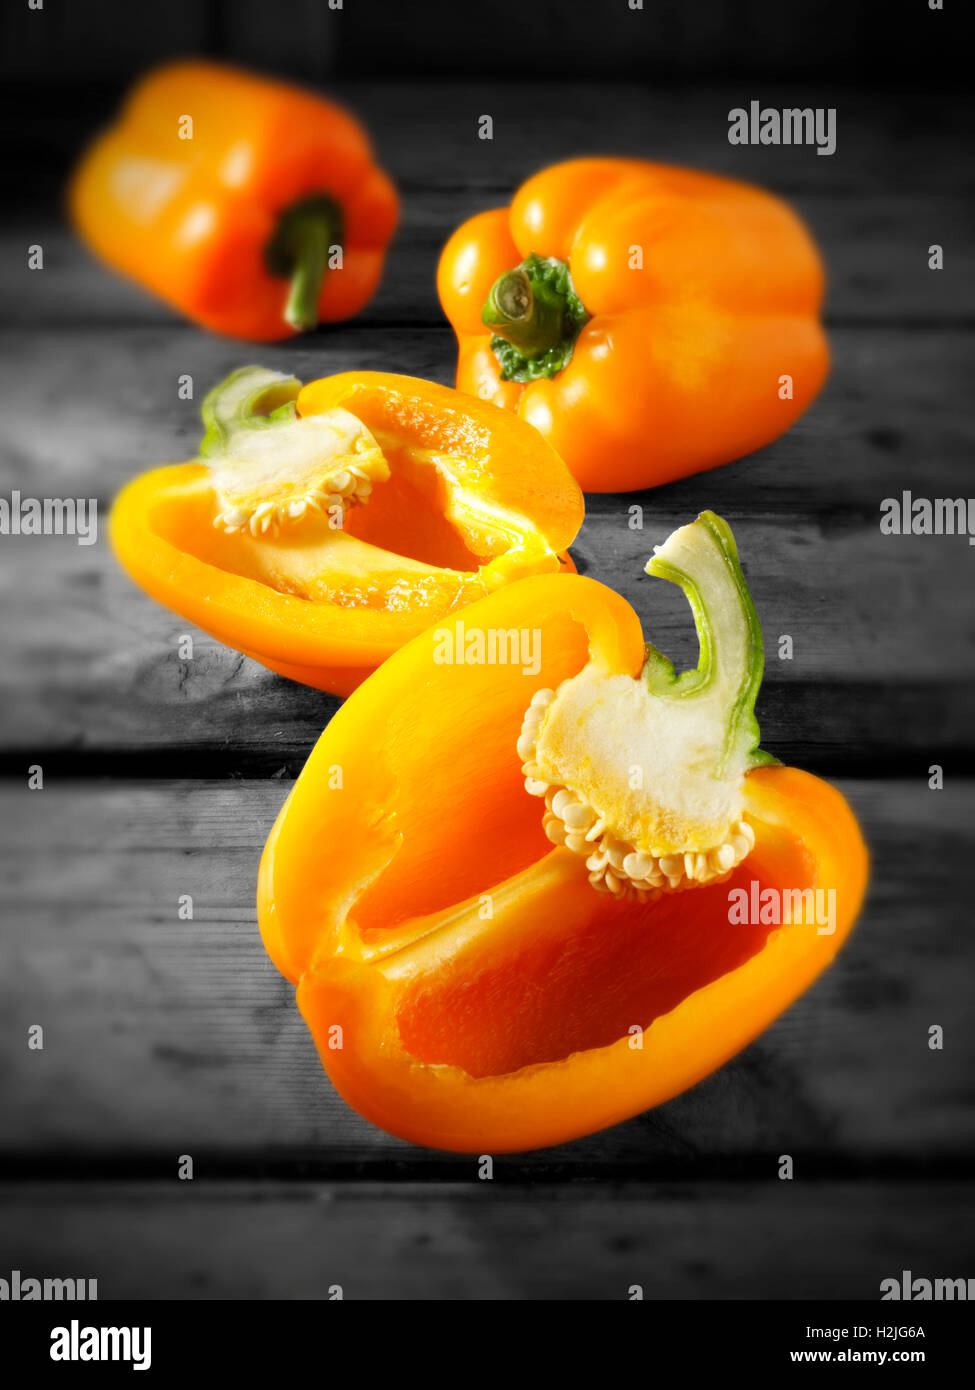 Fresh orange  bell peppers whole and cut Stock Photo